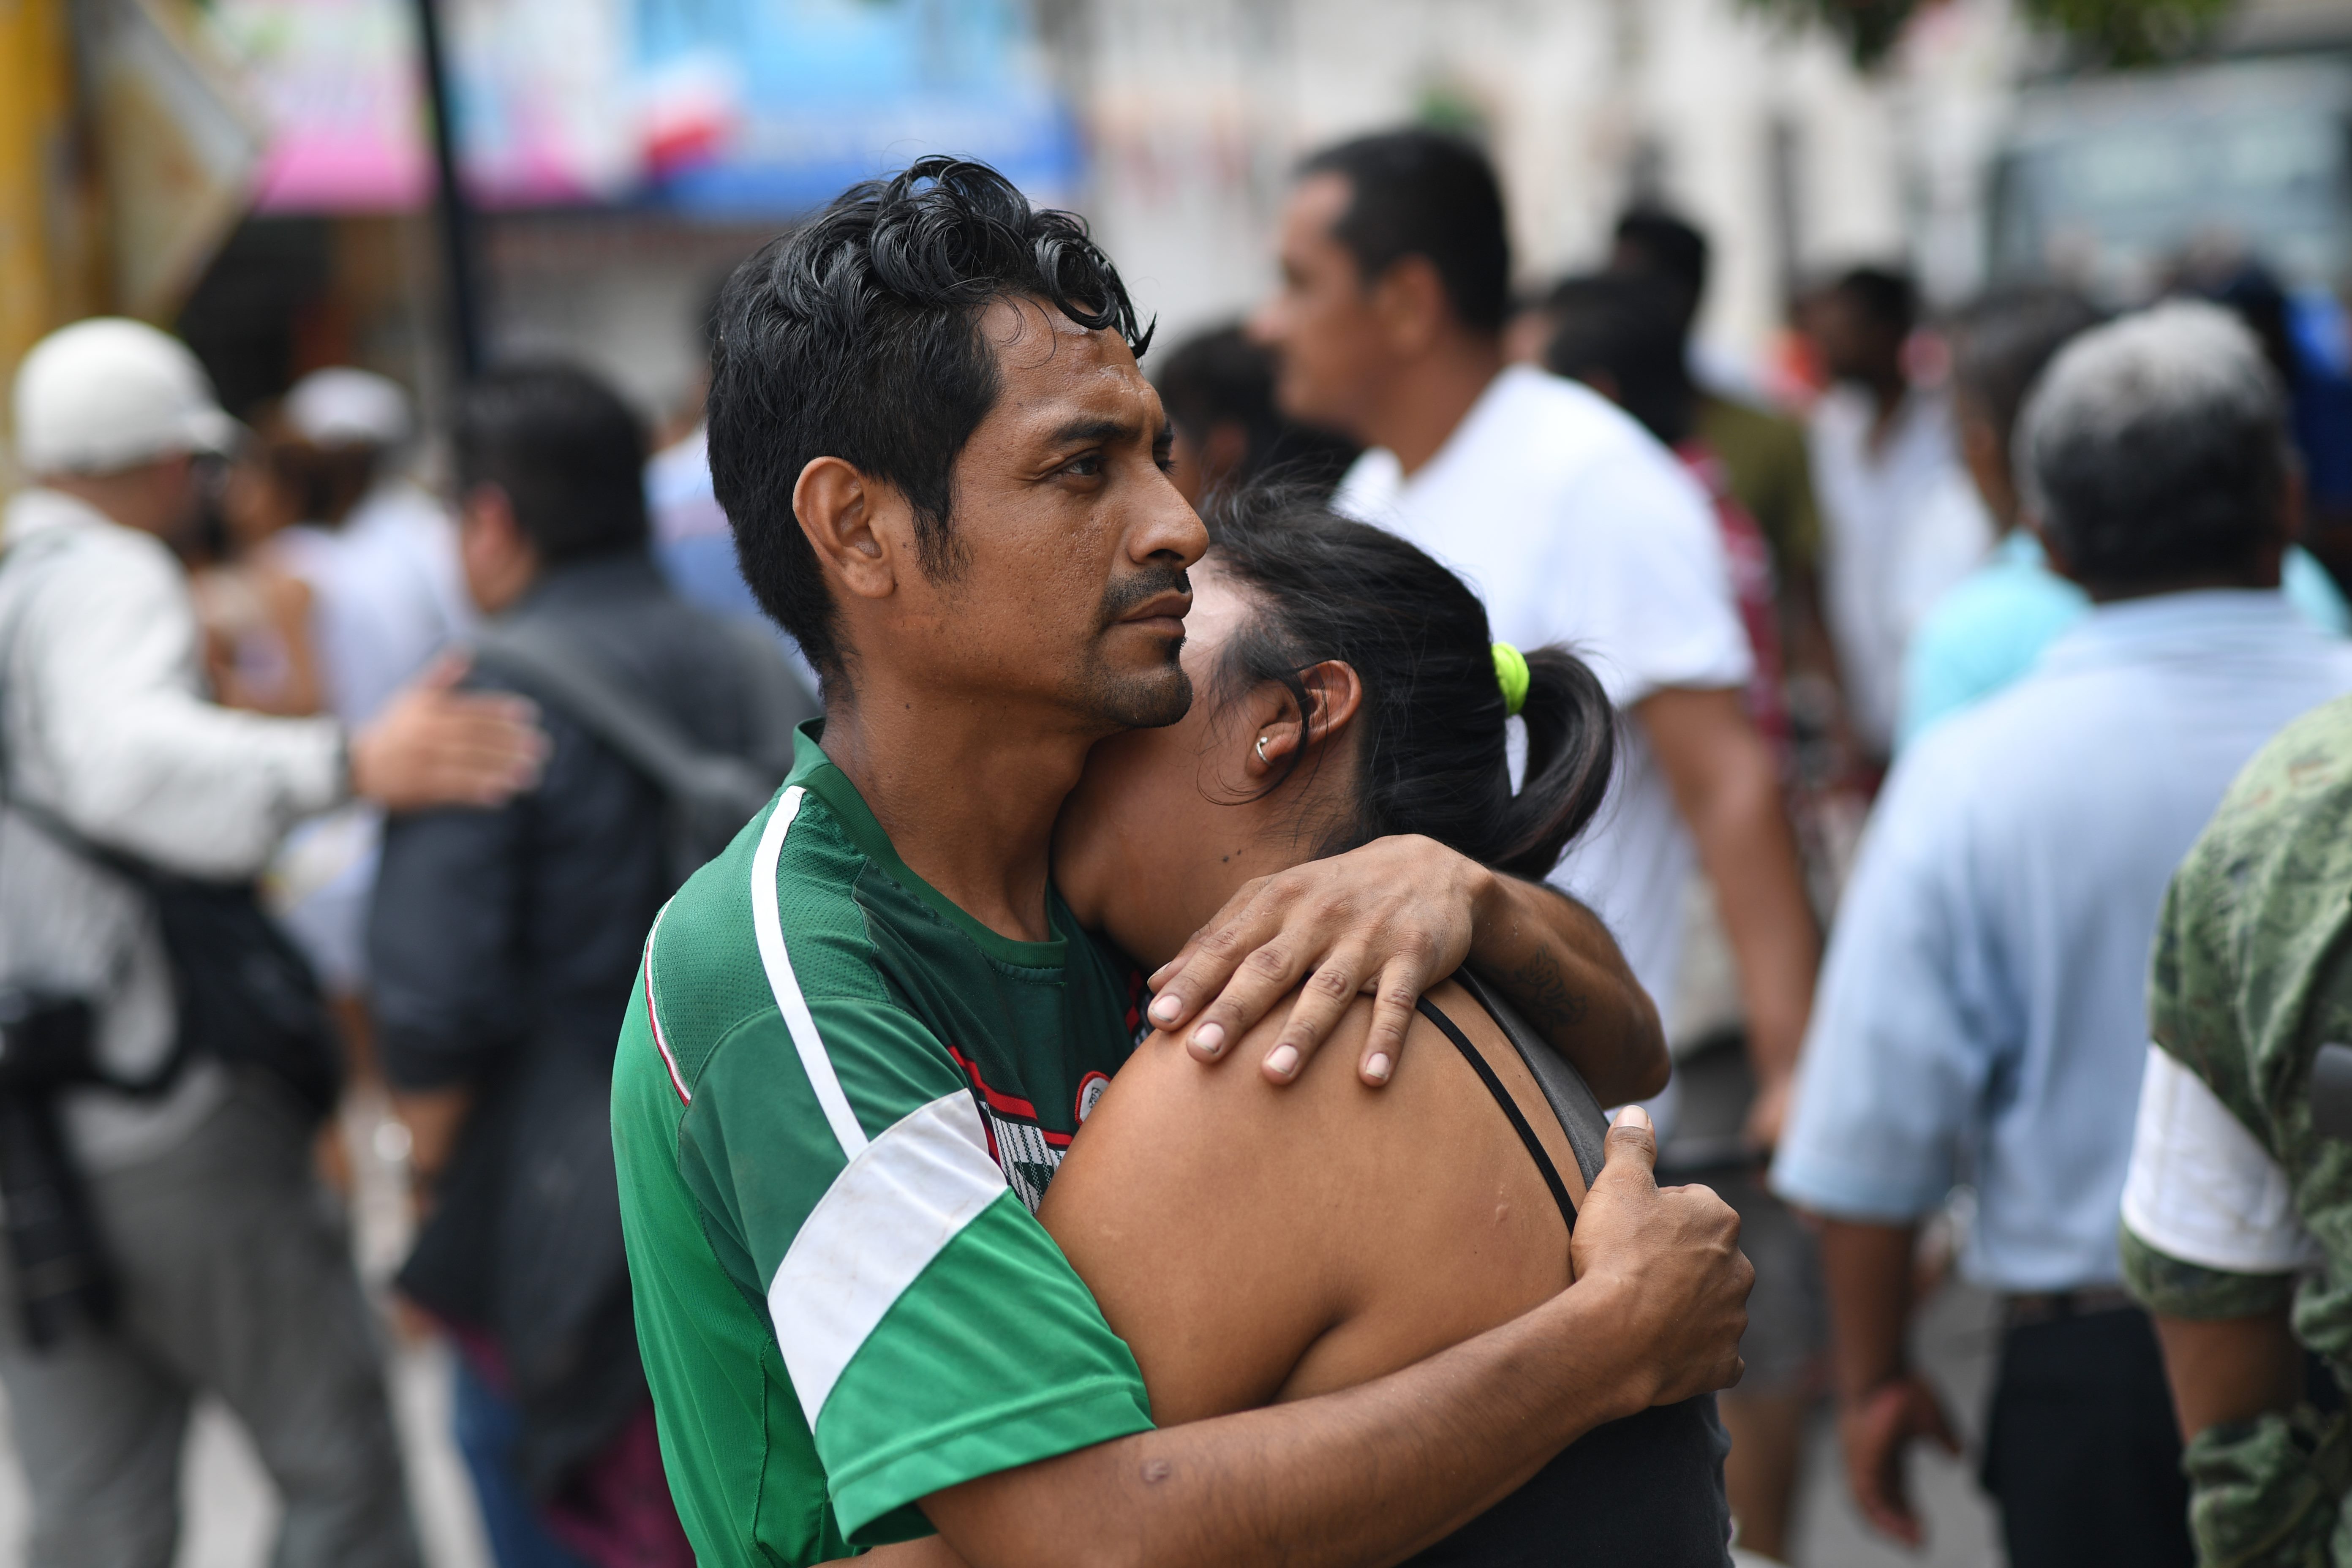 A couple embraces on September 8, 2017 in Juchitan de Zaragoza, state of Oaxaca, where buildings collapsed after an 8.2 earthquake that hit Mexico's Pacific coast overnight. Mexico's most powerful earthquake in a century killed at least 35 people, officials said, after it struck the Pacific coast, wrecking homes and sending families fleeing into the streets. / AFP PHOTO / Pedro PARDO (Photo credit should read PEDRO PARDO/AFP/Getty Images)